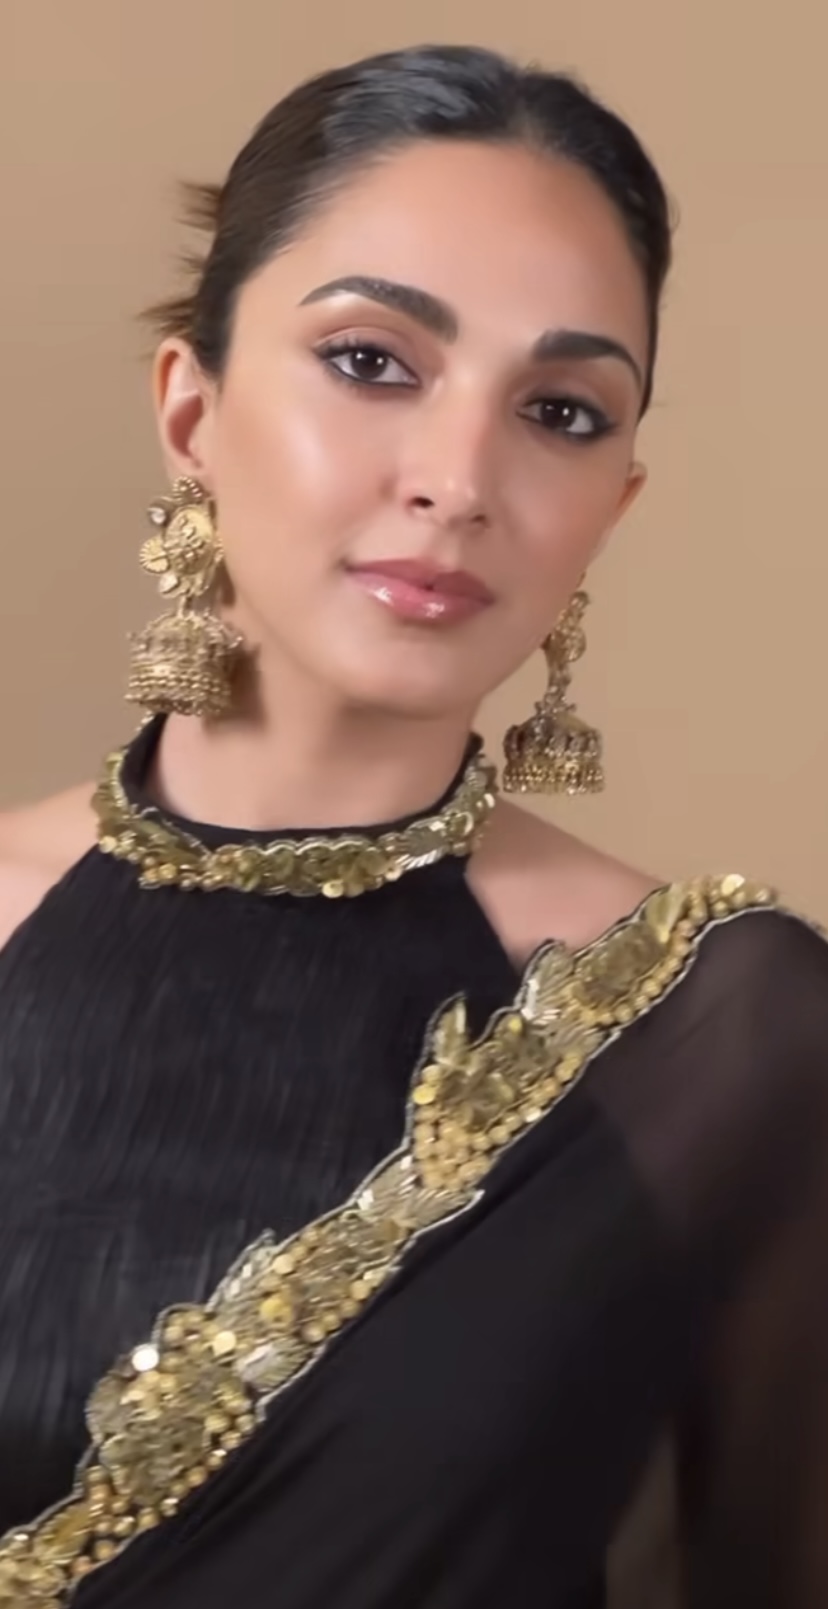 Kiara Advani is elegant as ever in a beautiful black and golden saree for Umang 2023 